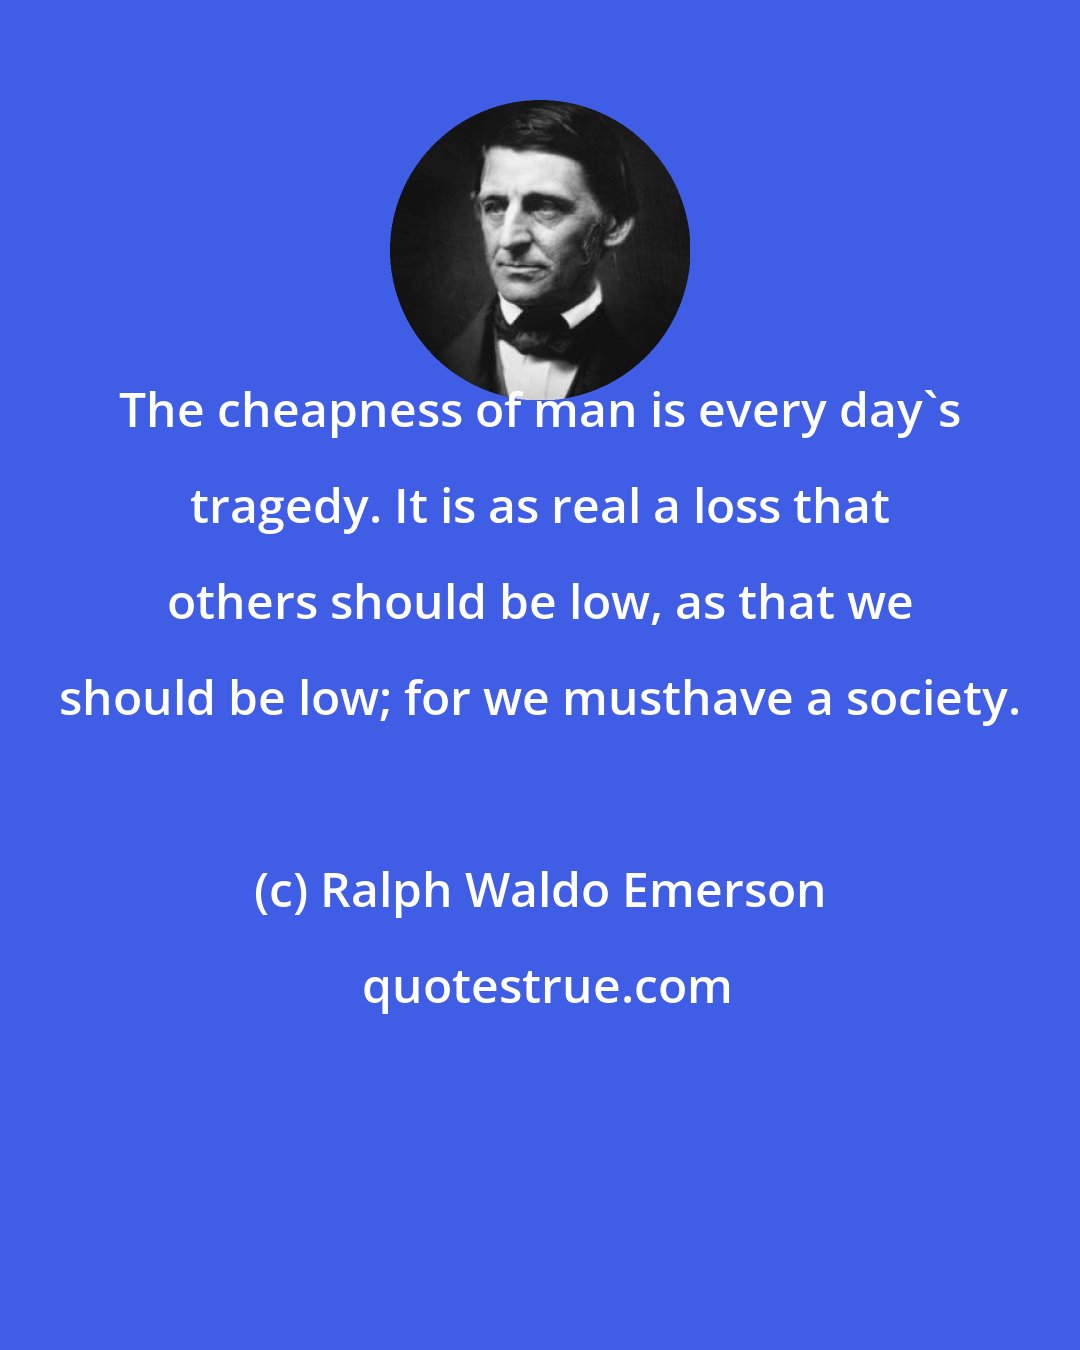 Ralph Waldo Emerson: The cheapness of man is every day's tragedy. It is as real a loss that others should be low, as that we should be low; for we musthave a society.